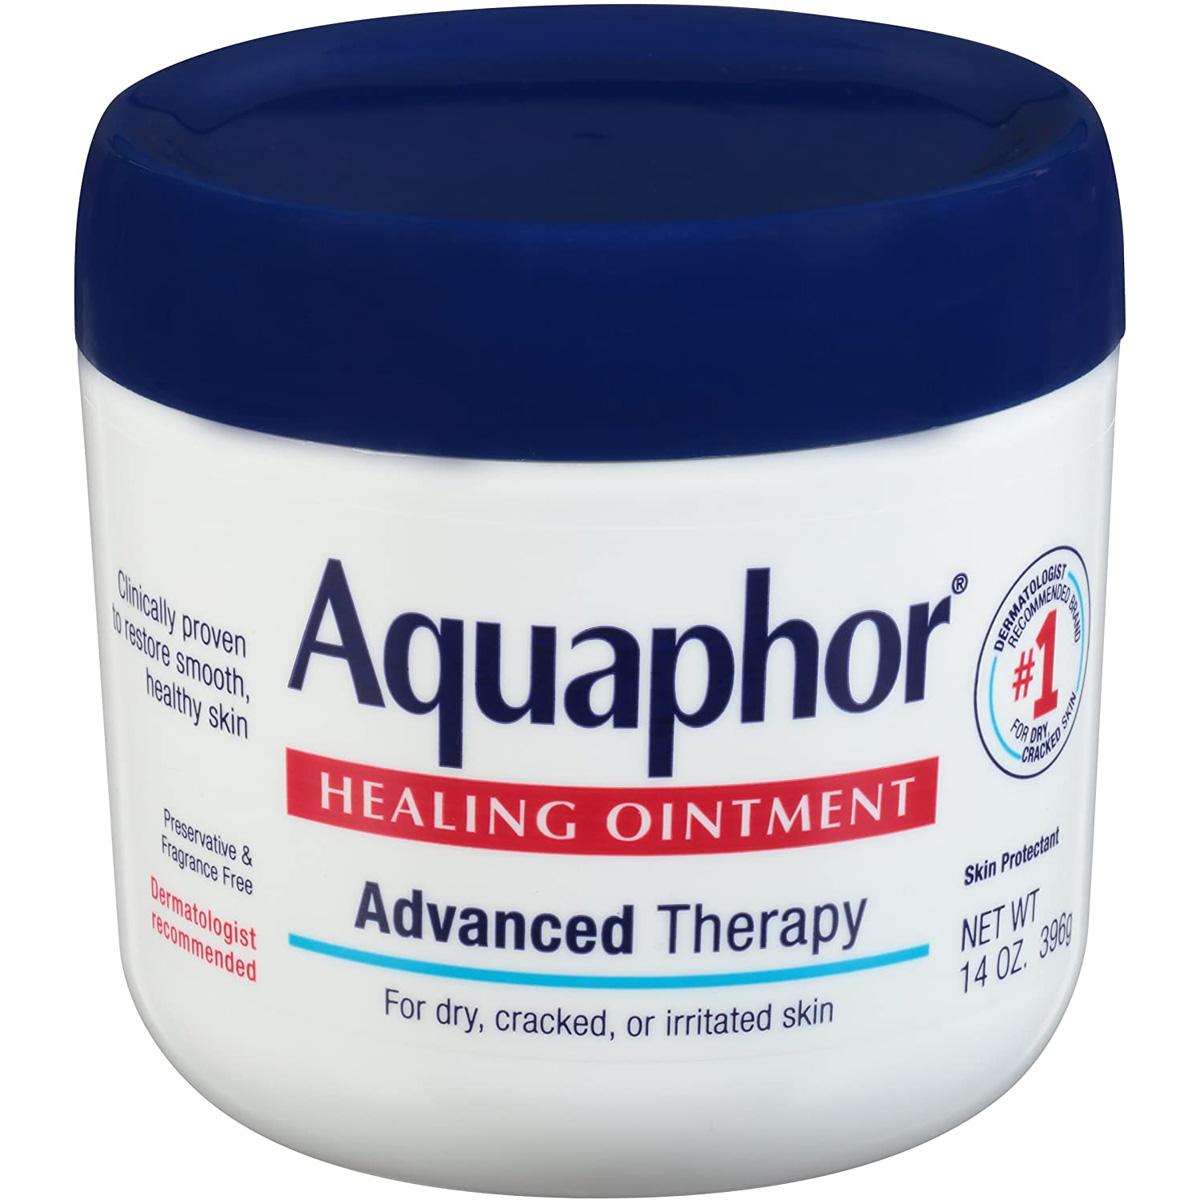 Aquaphor Healing Ointment Moisturizing Skin Protectant for Dry for $7.61 Shipped